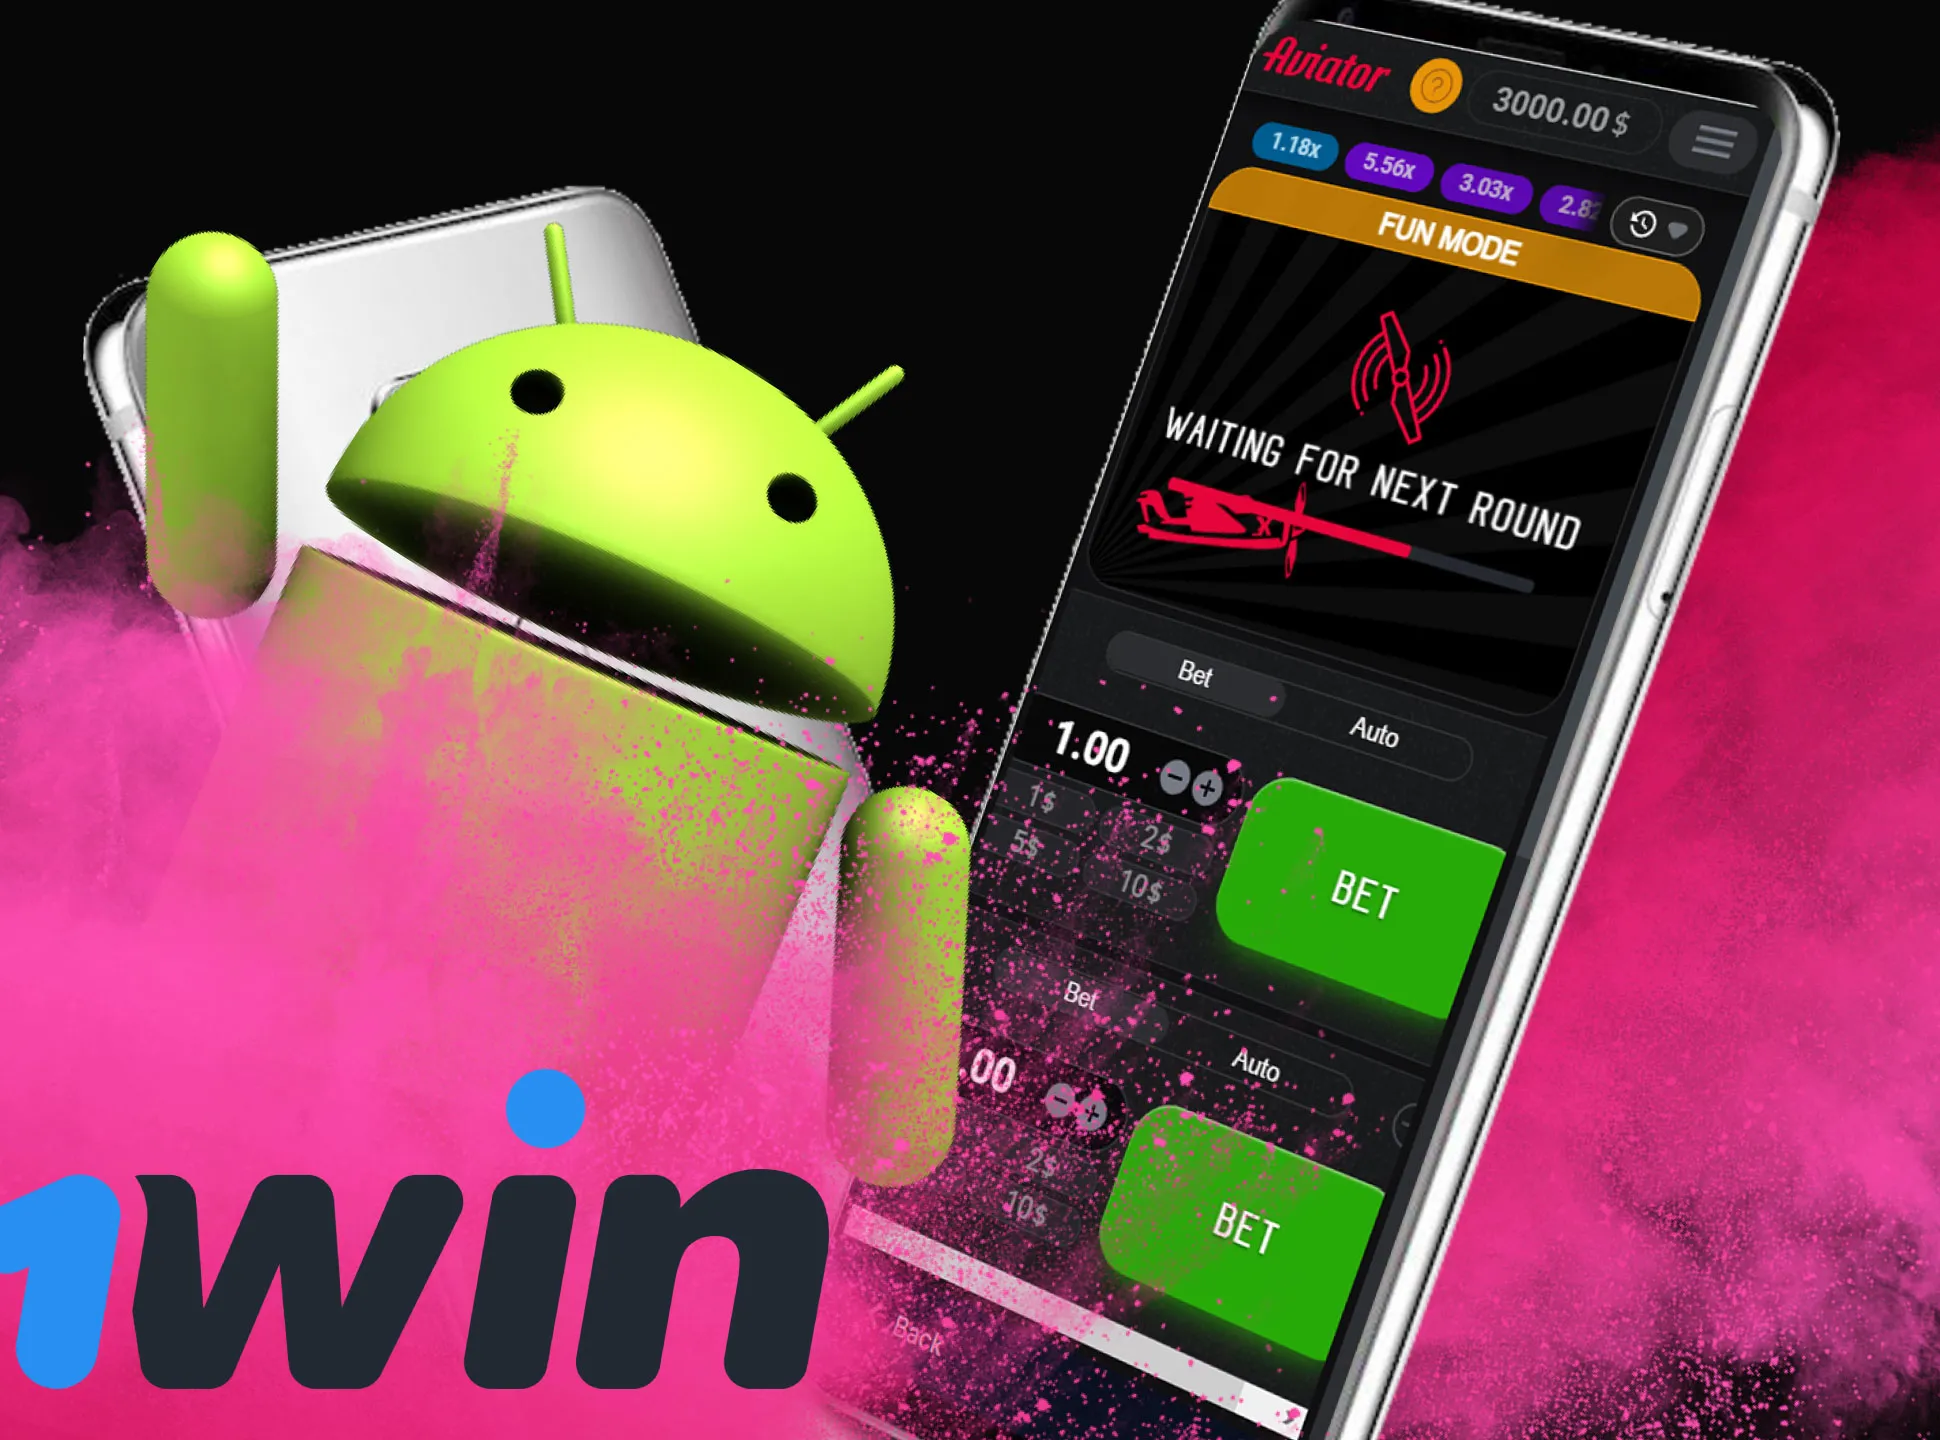 Download the 1win app on your Android device.